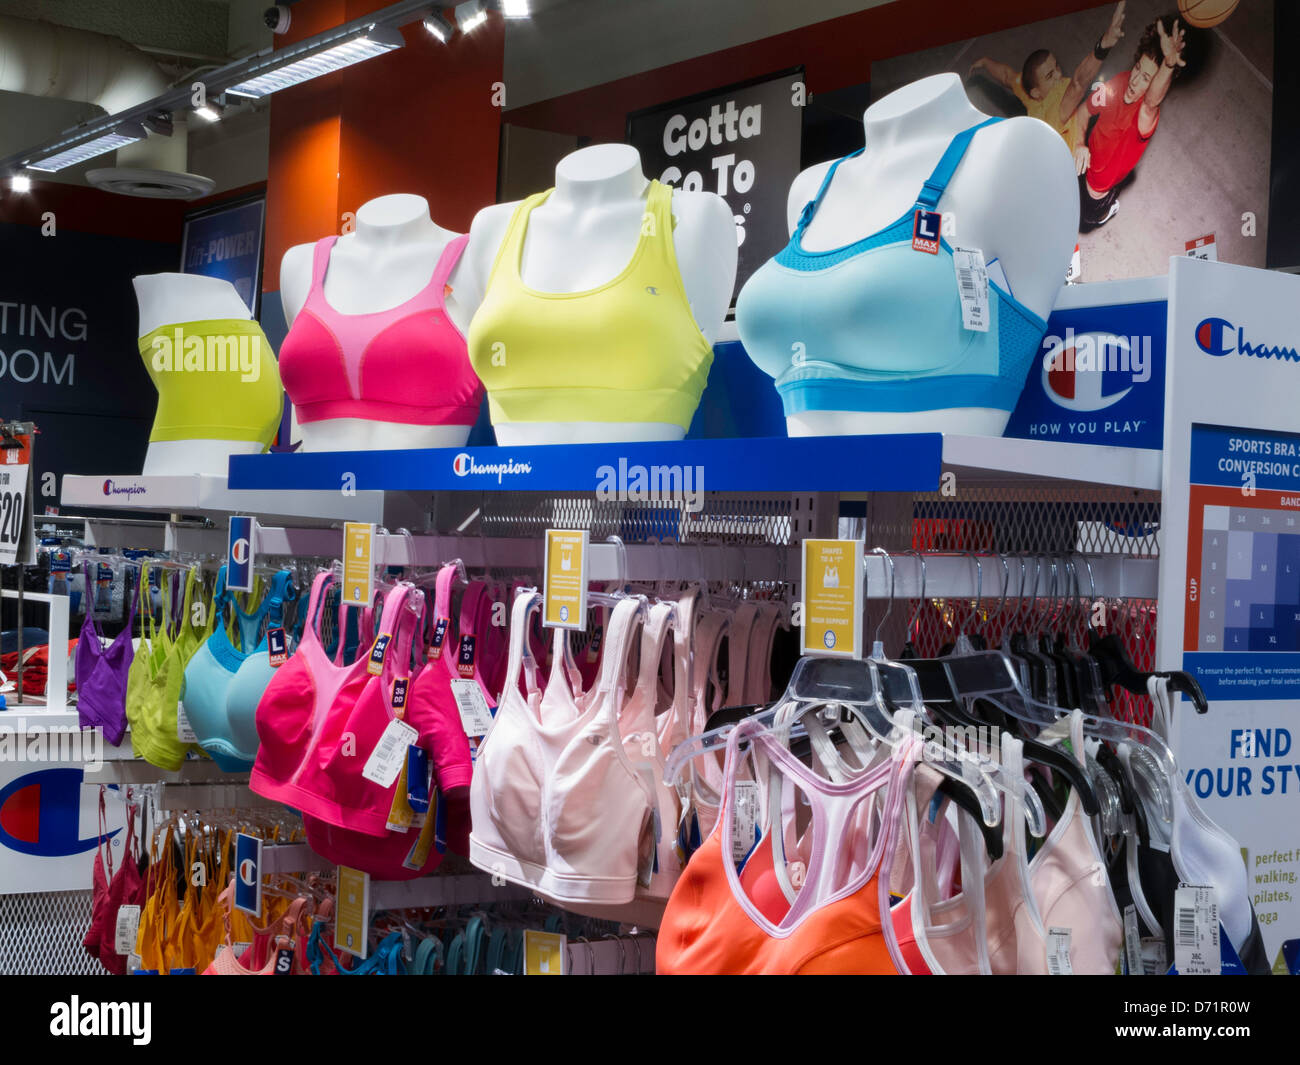 Sports Bras Display, Modell's Sporting Goods Store Interior, NYC Stock Photo